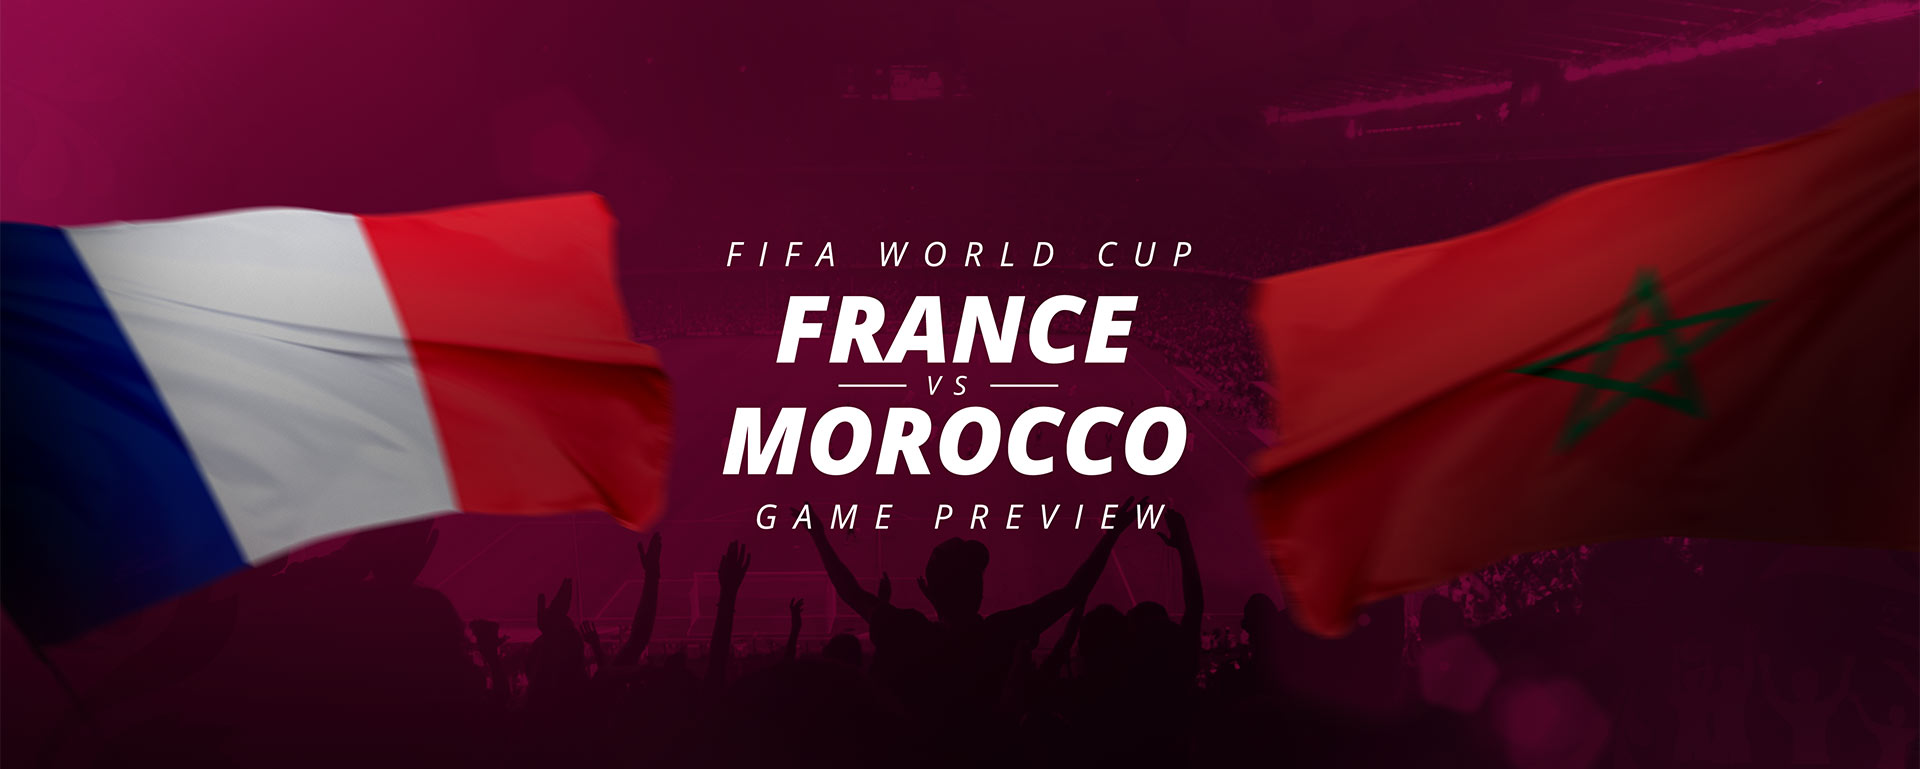 FIFA WORLD CUP: FRANCE V MOROCCO – GAME PREVIEW